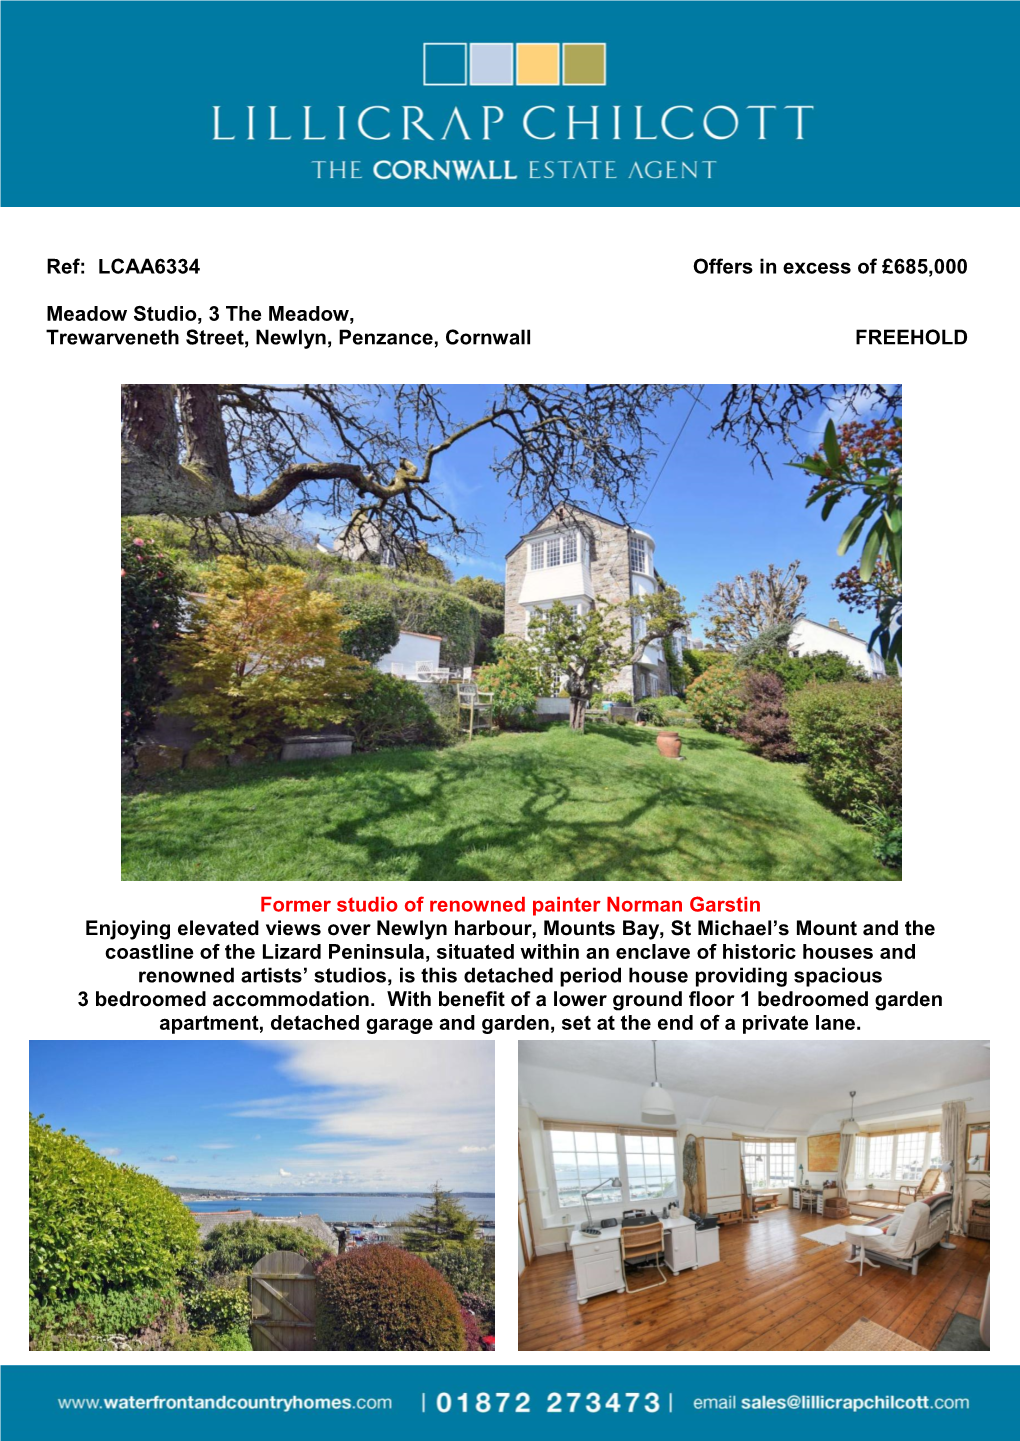 Ref: LCAA6334 Offers in Excess of £685,000